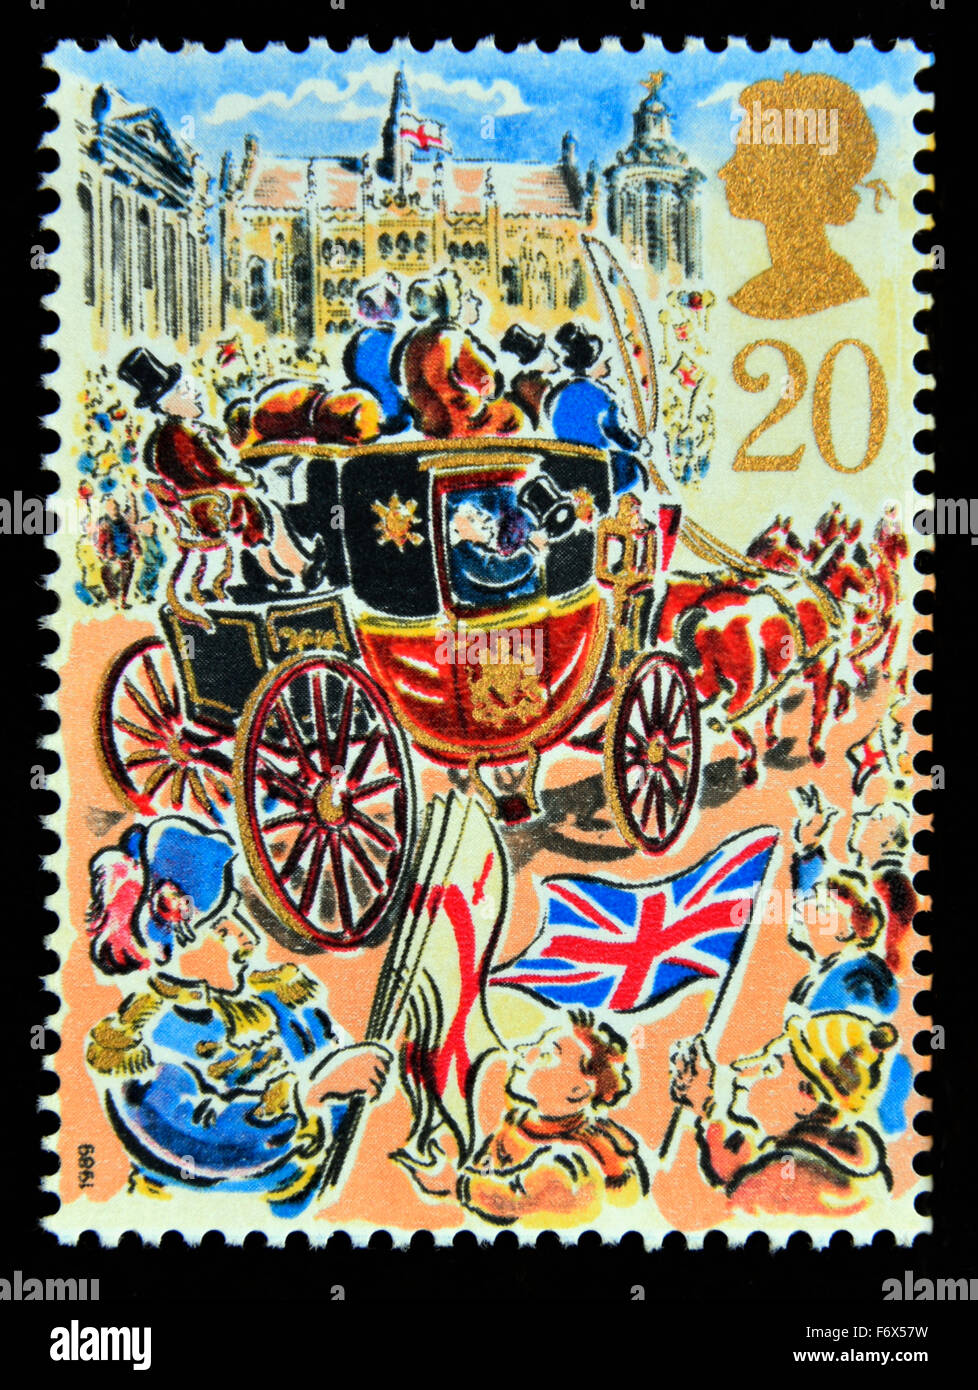 Postage stamp. Great Britain. Queen Elizabeth II. 1989. Lord Mayor's Show, London. Royal Mail Coach. 20p. Stock Photo